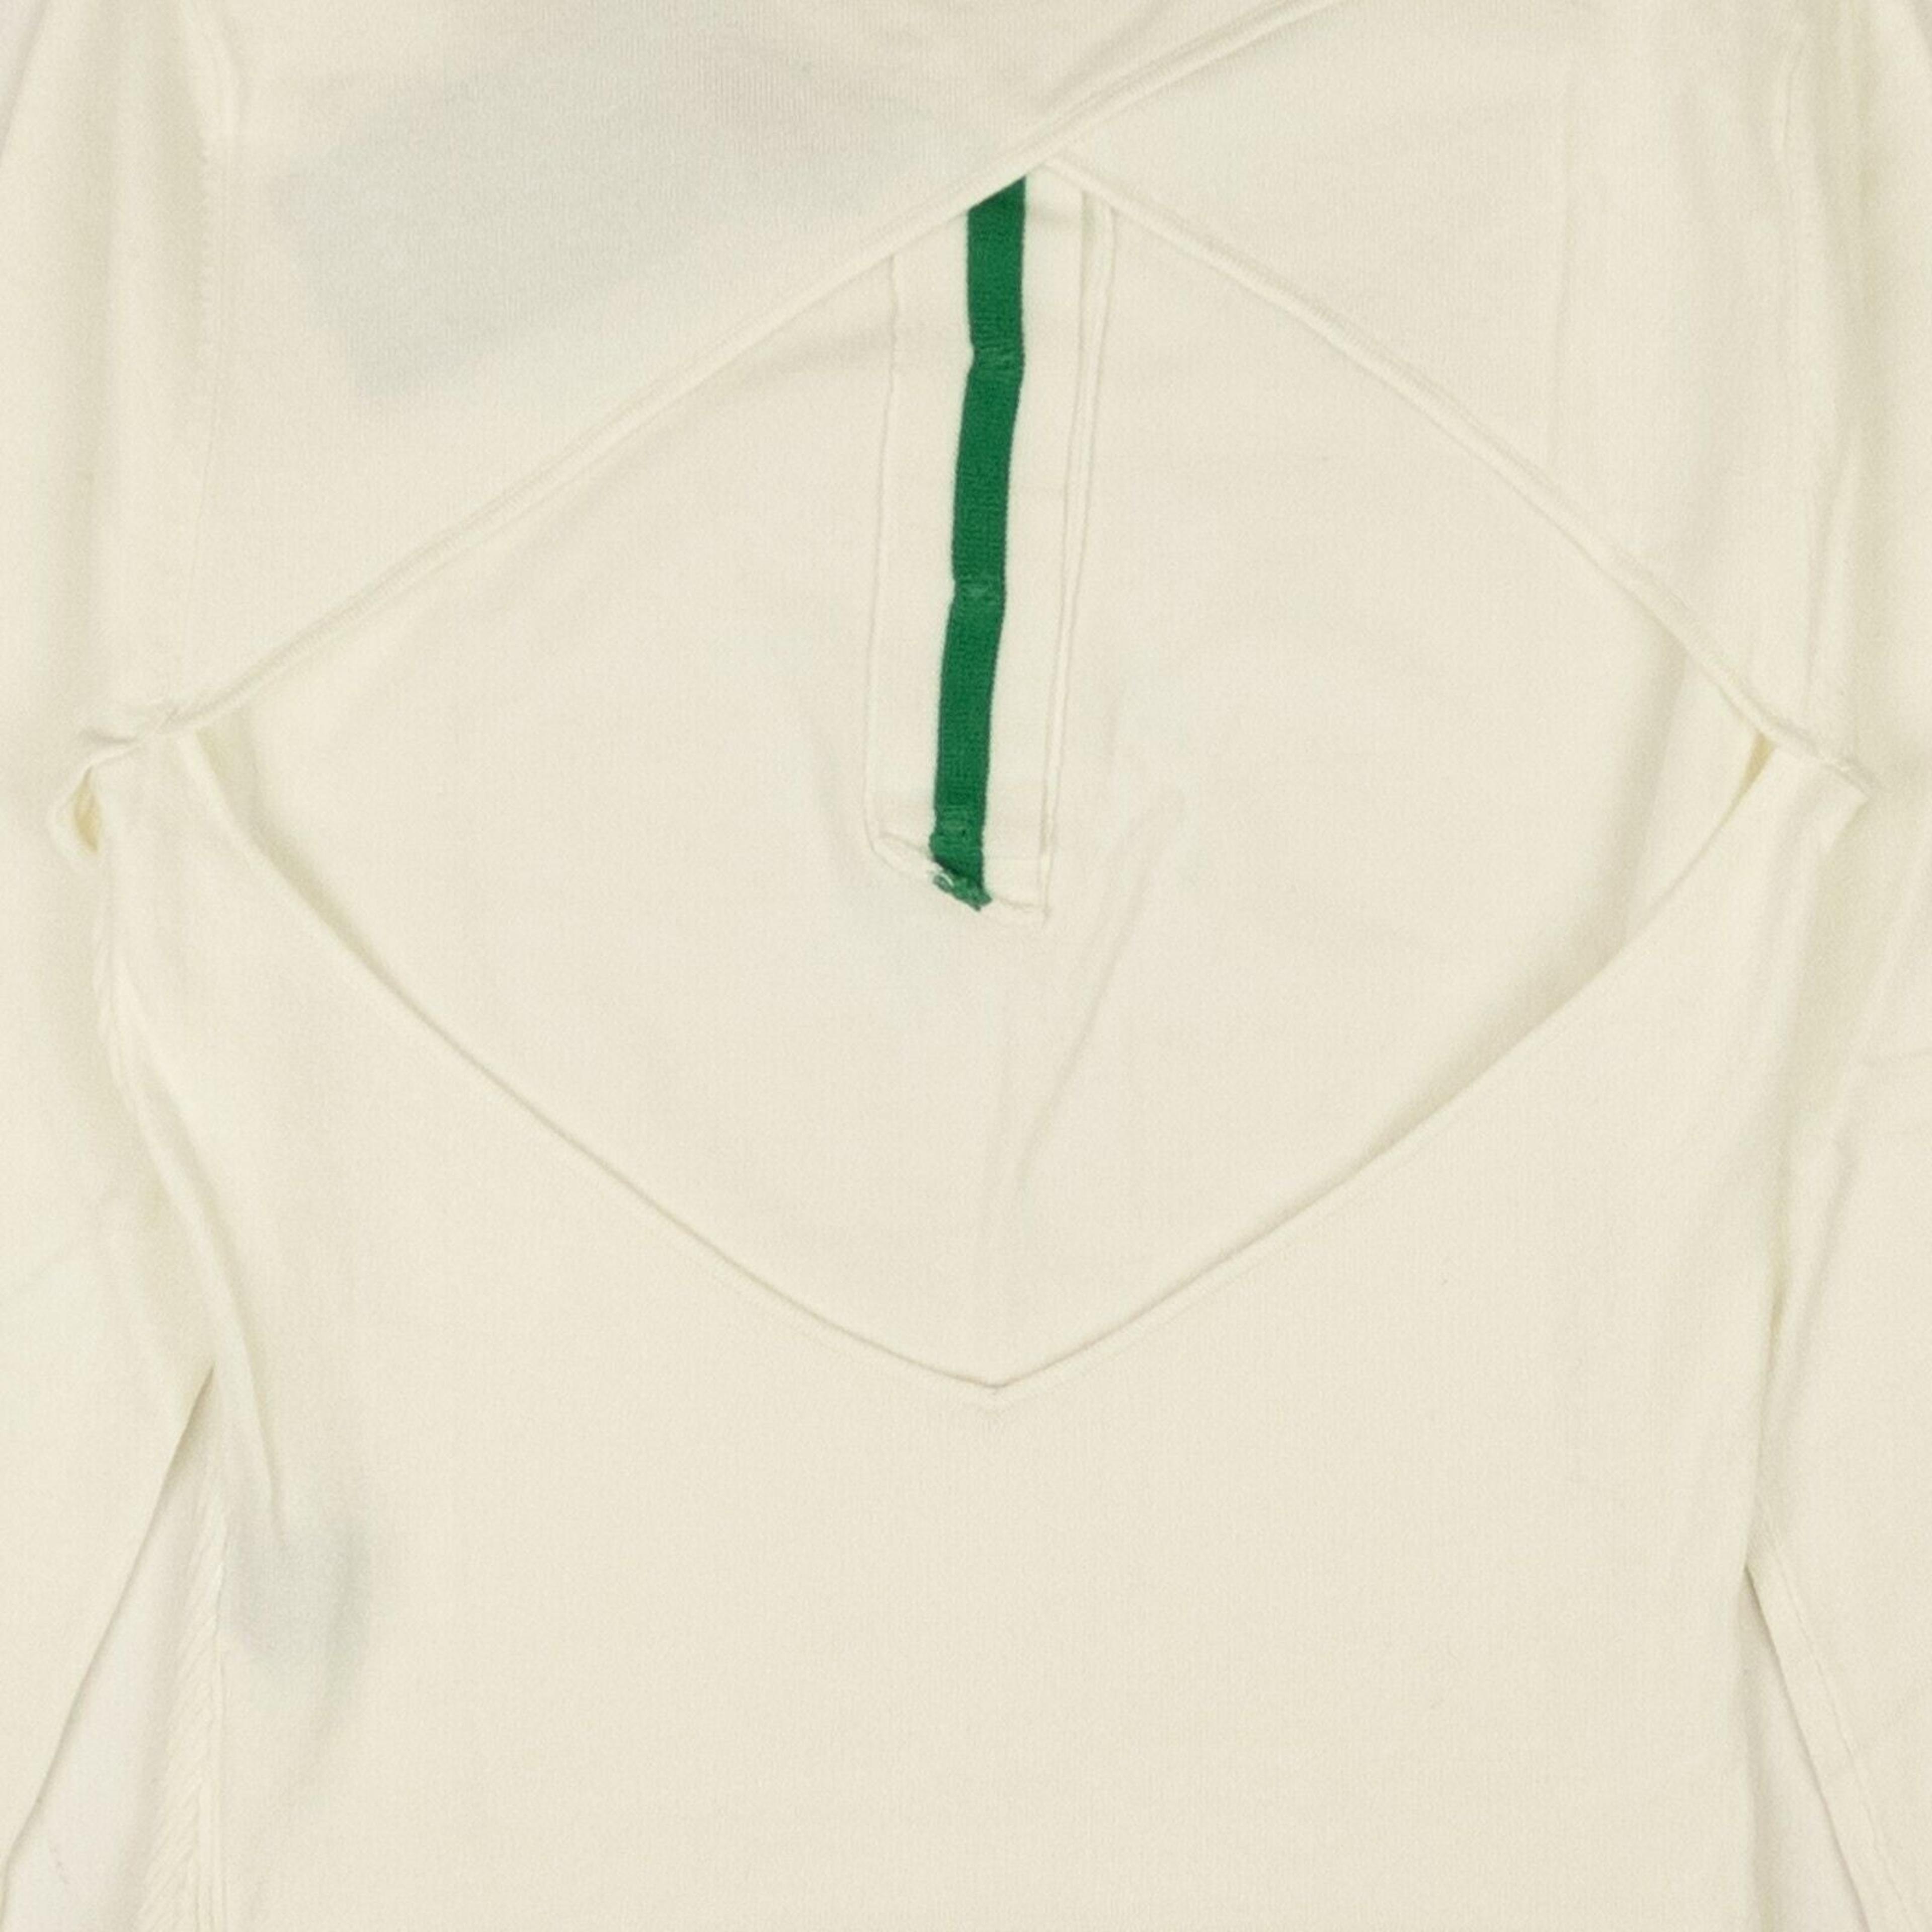 Alternate View 3 of Cream And Green Viscose F-1 Long Sleeve Polo Shirt